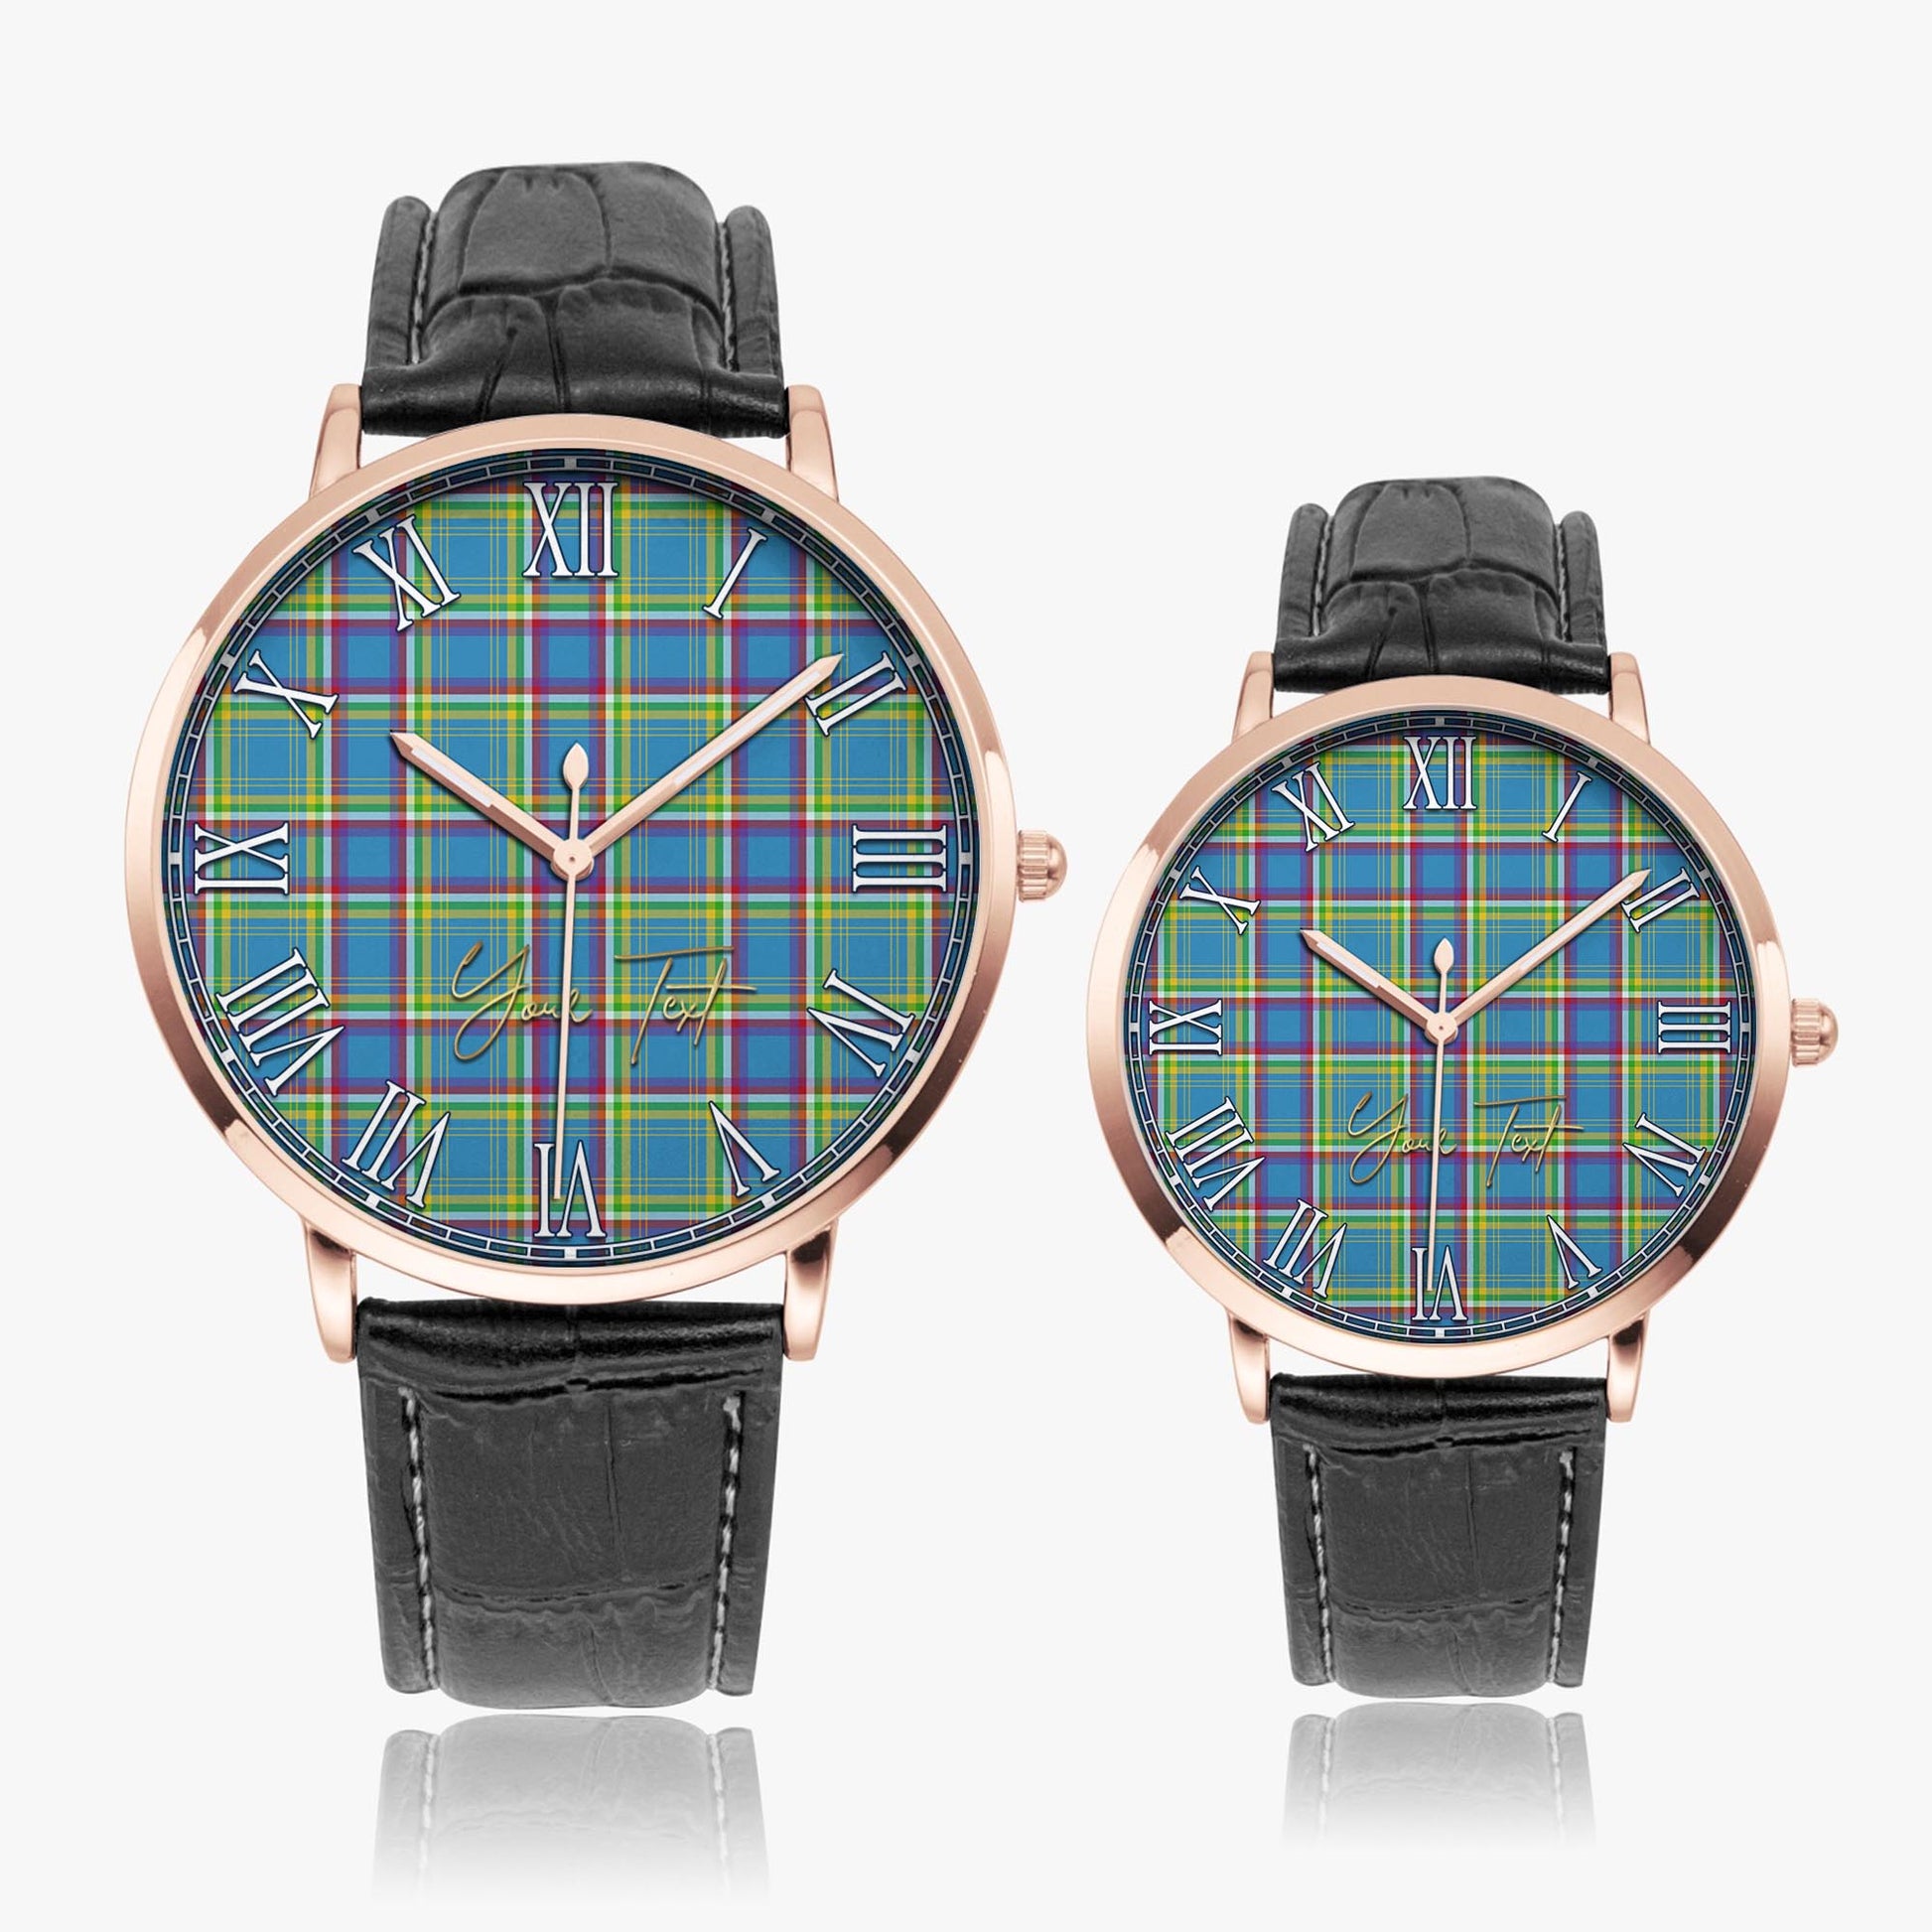 Yukon Territory Canada Tartan Personalized Your Text Leather Trap Quartz Watch Ultra Thin Rose Gold Case With Black Leather Strap - Tartanvibesclothing Shop